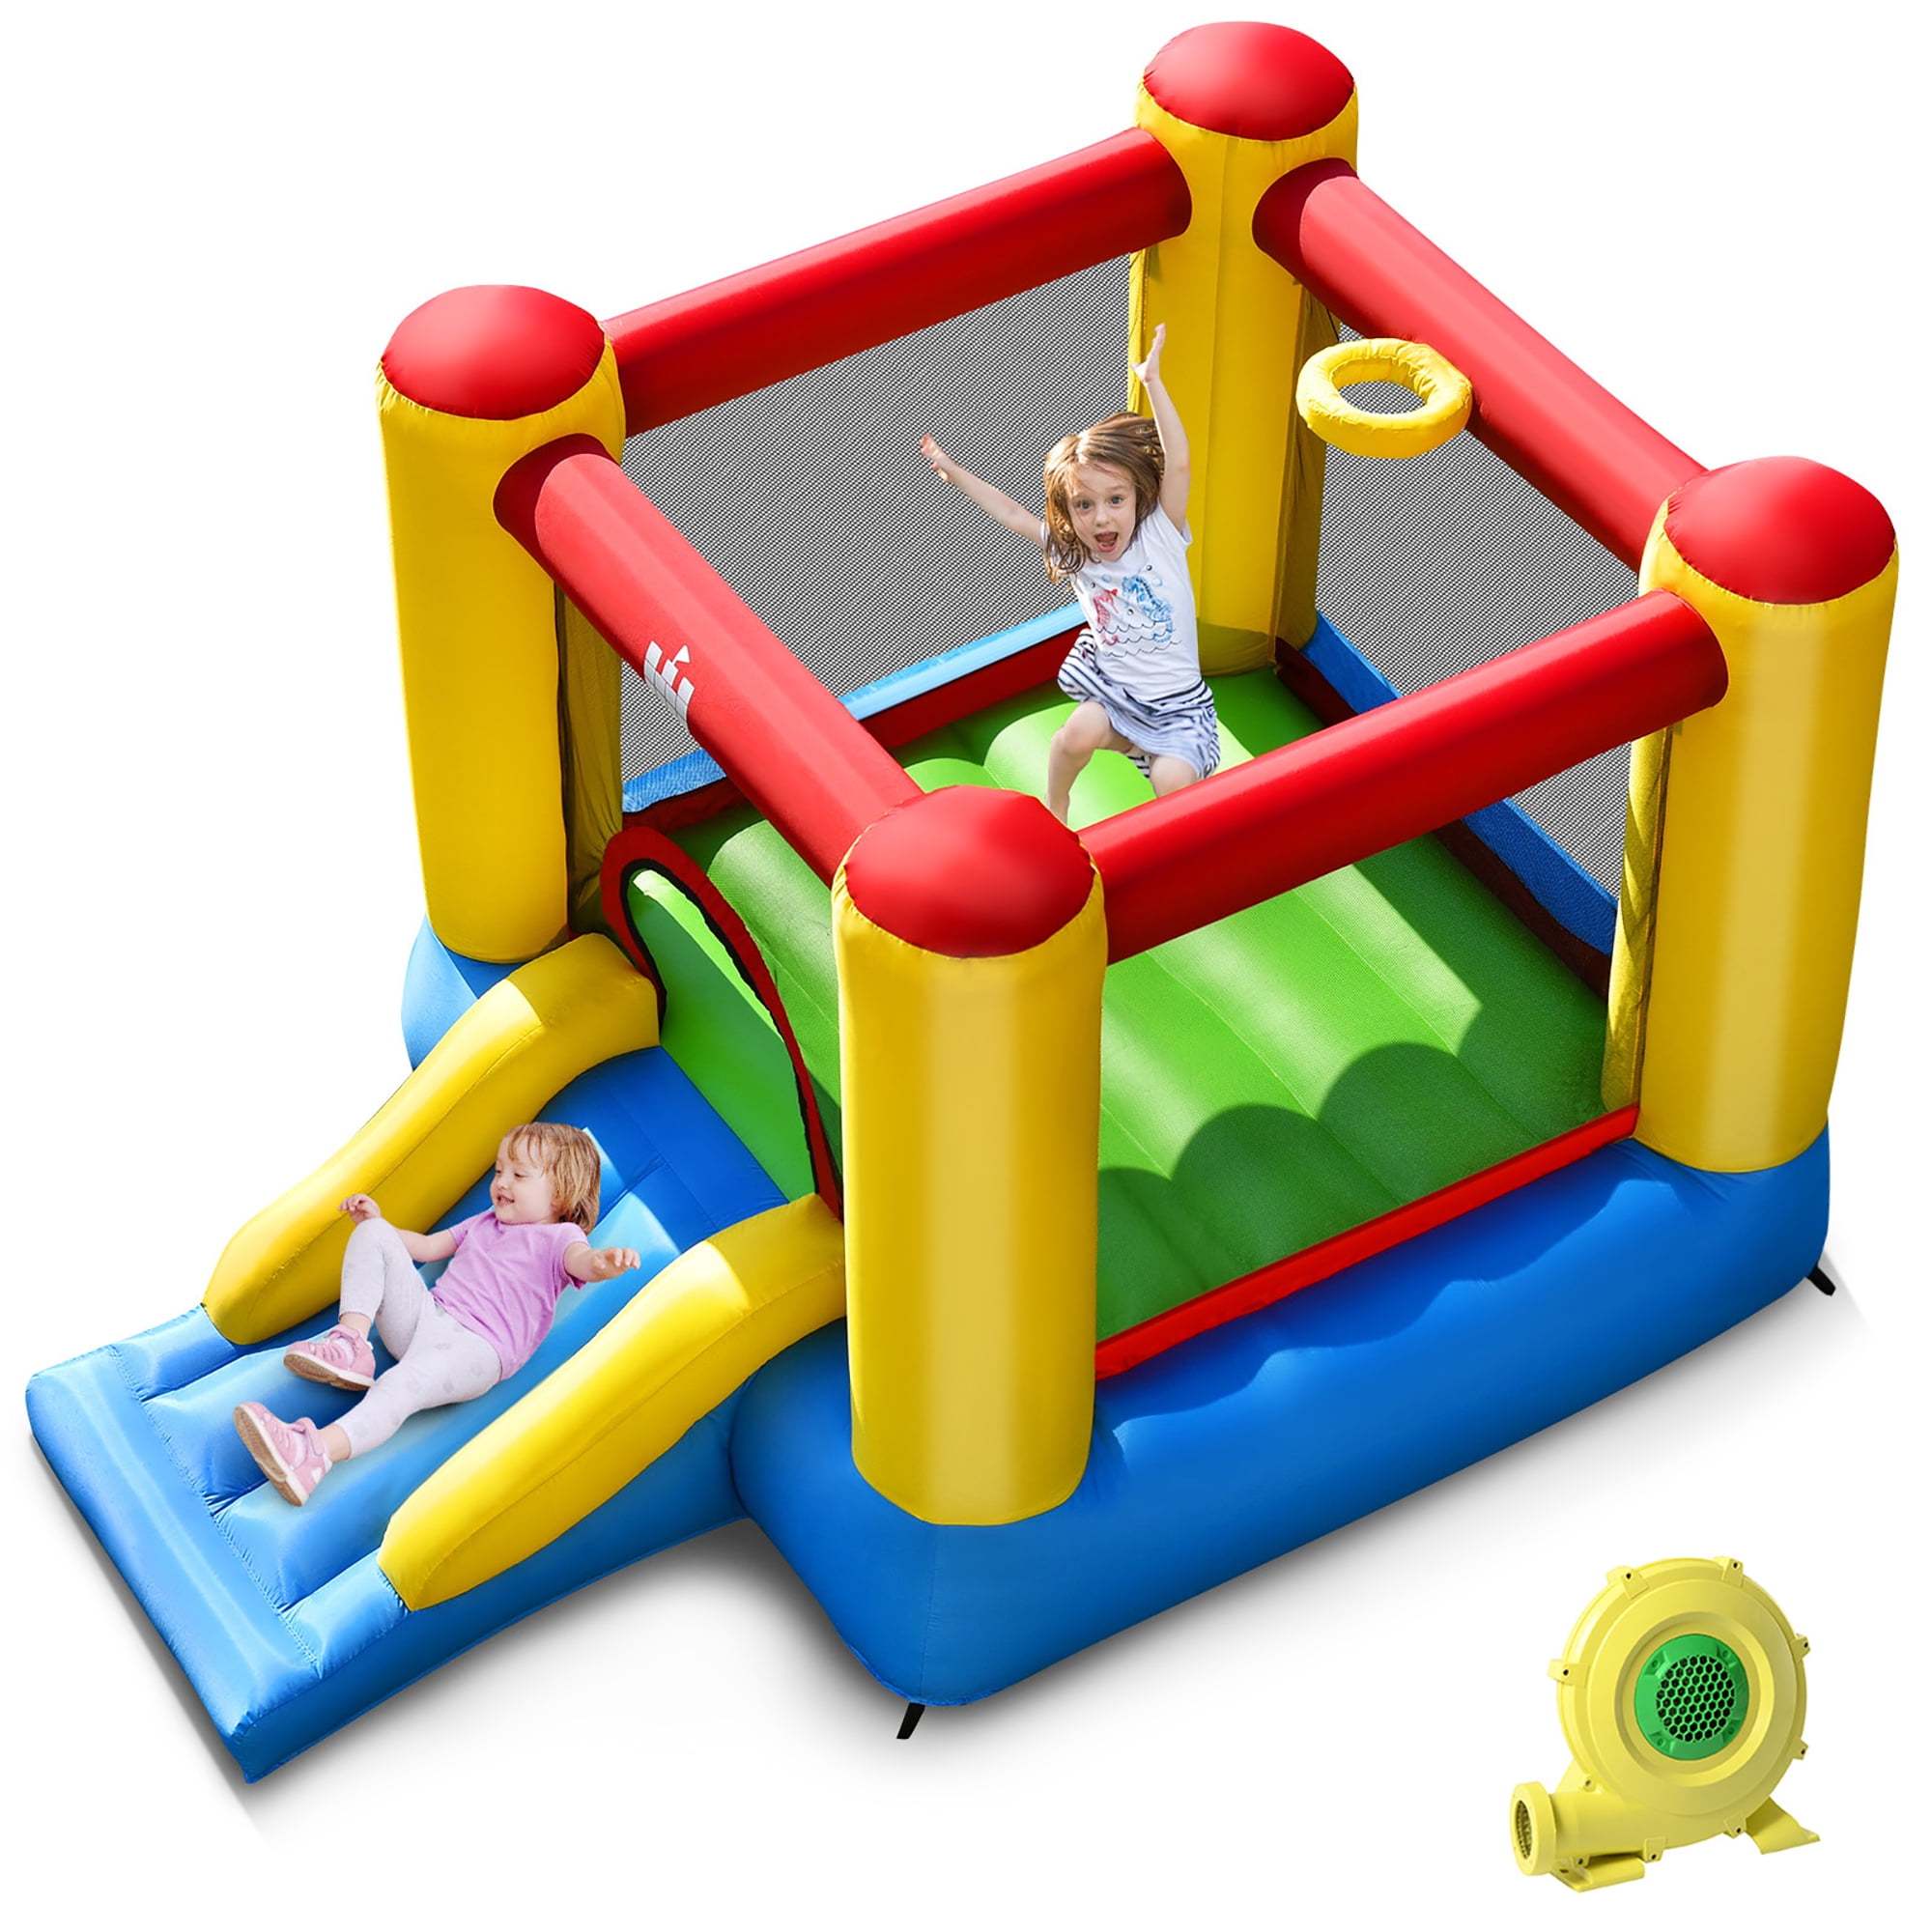 Castle Jumper Slide Mesh Walls Costzon Inflatable Bounce House Castle Kids Party Jump Bouncer House w/Net Carry Bag Without Blower 